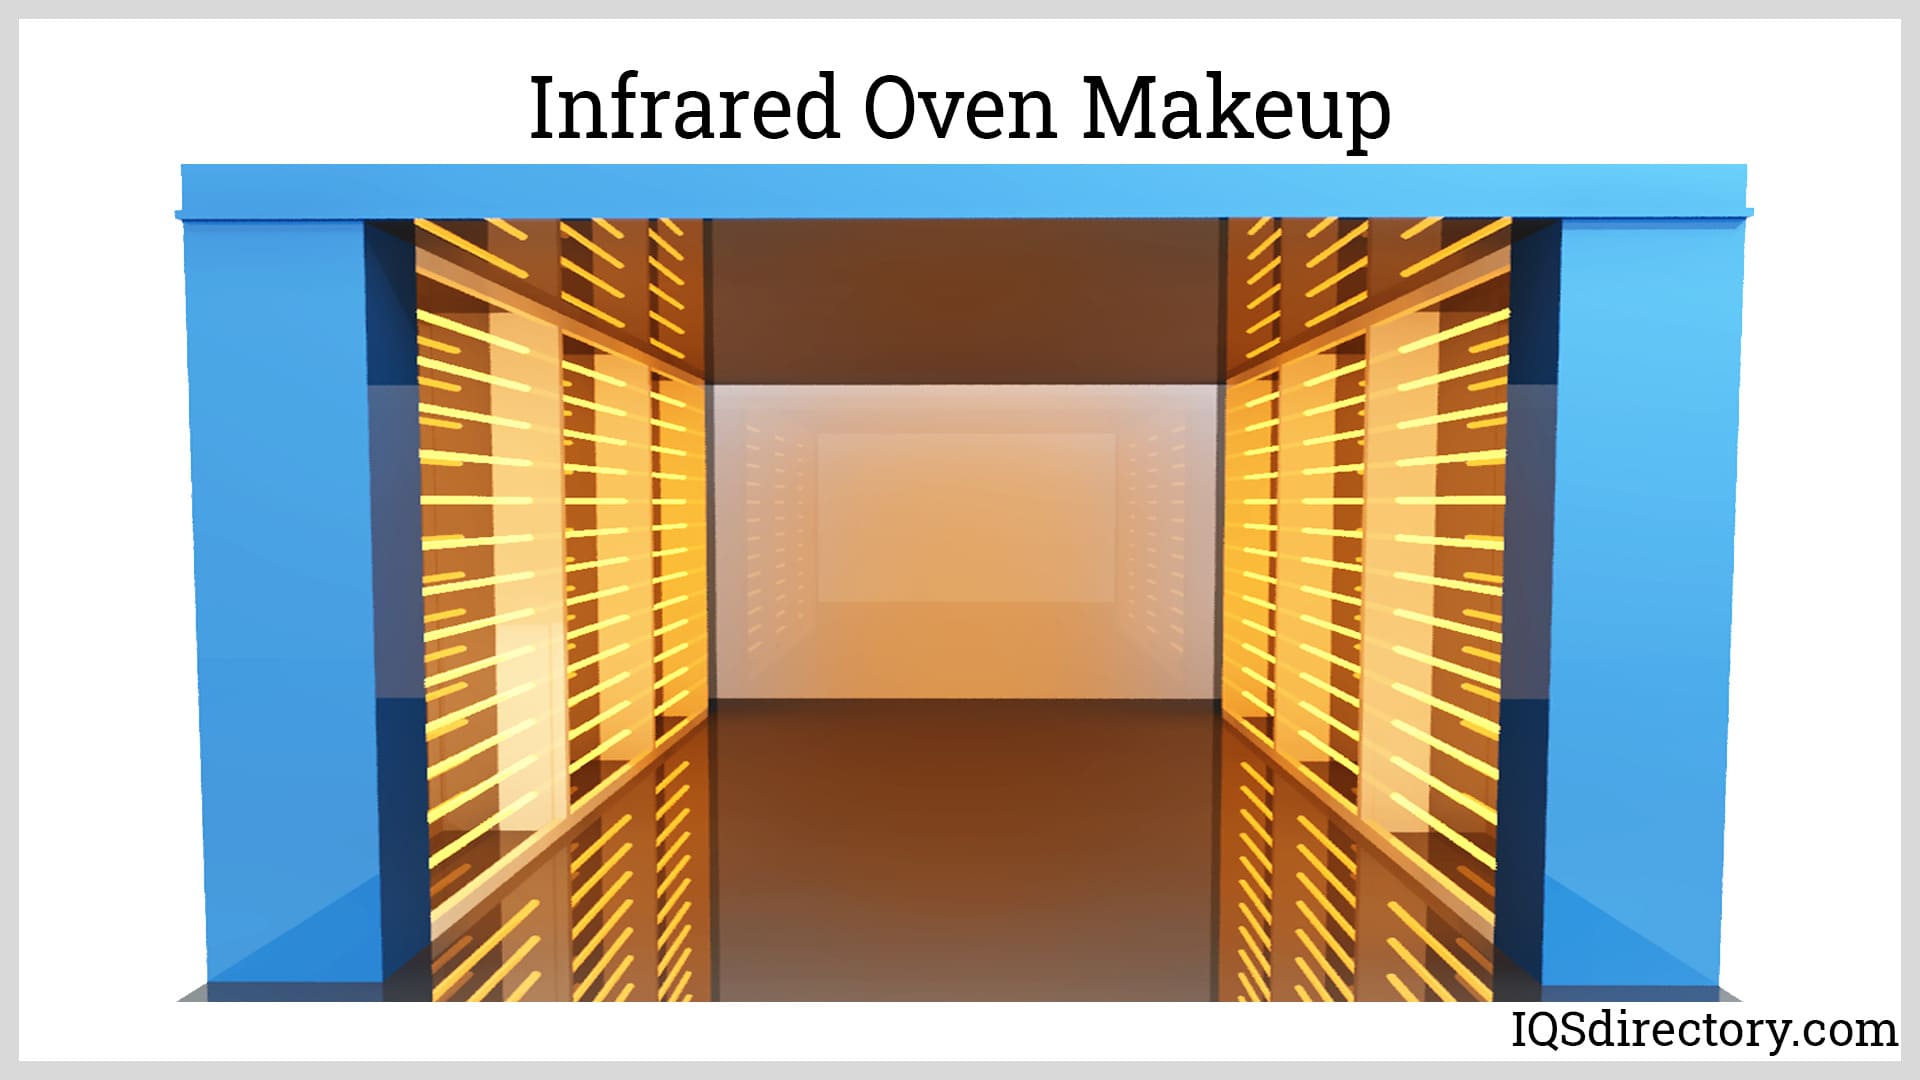 Infrared Oven Makeup